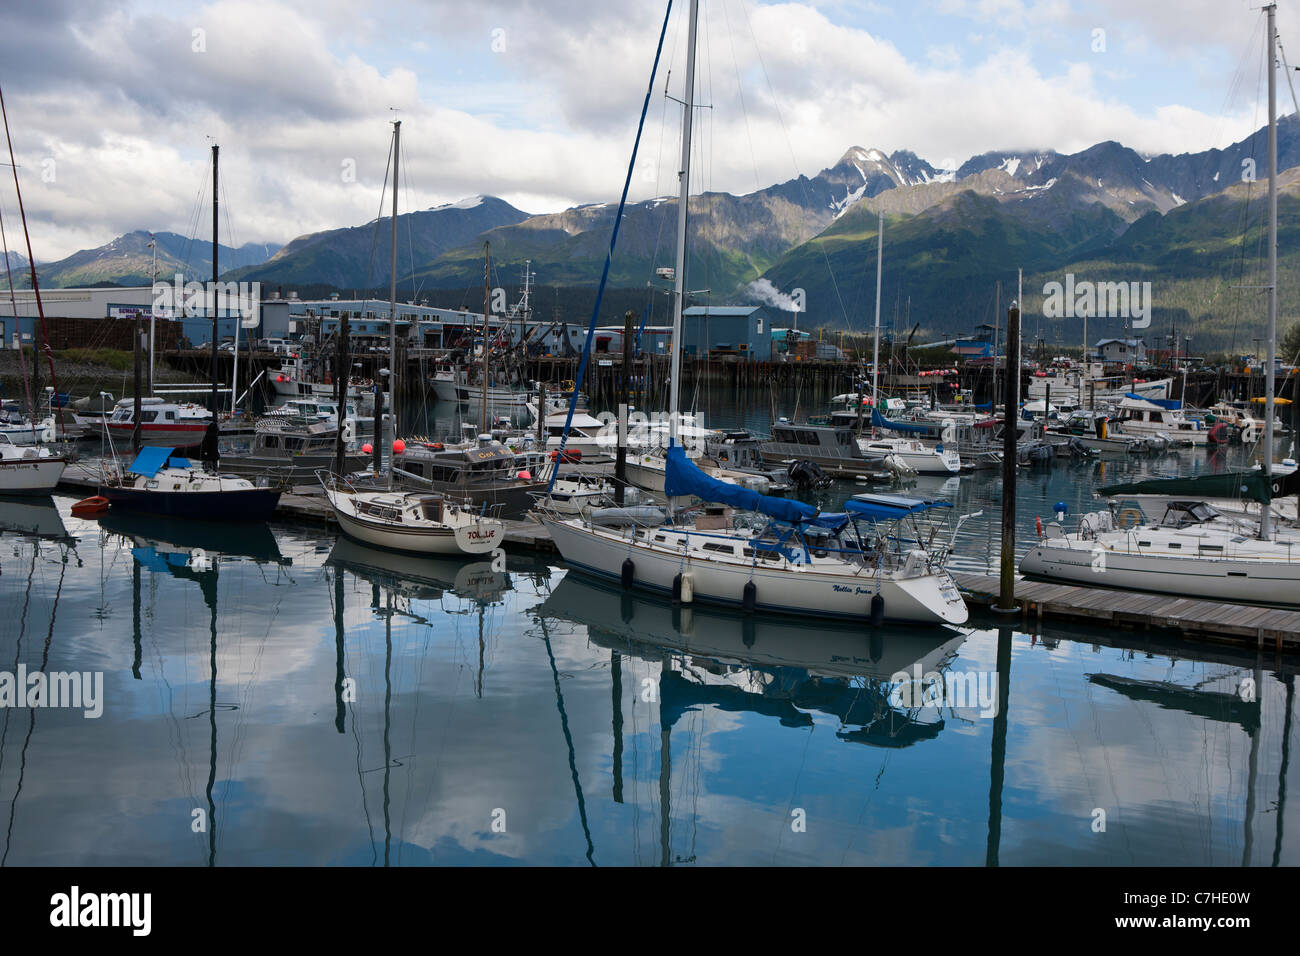 Sailboats in a marina with mountains in the background, Seward, Alaska, United States of America Stock Photo